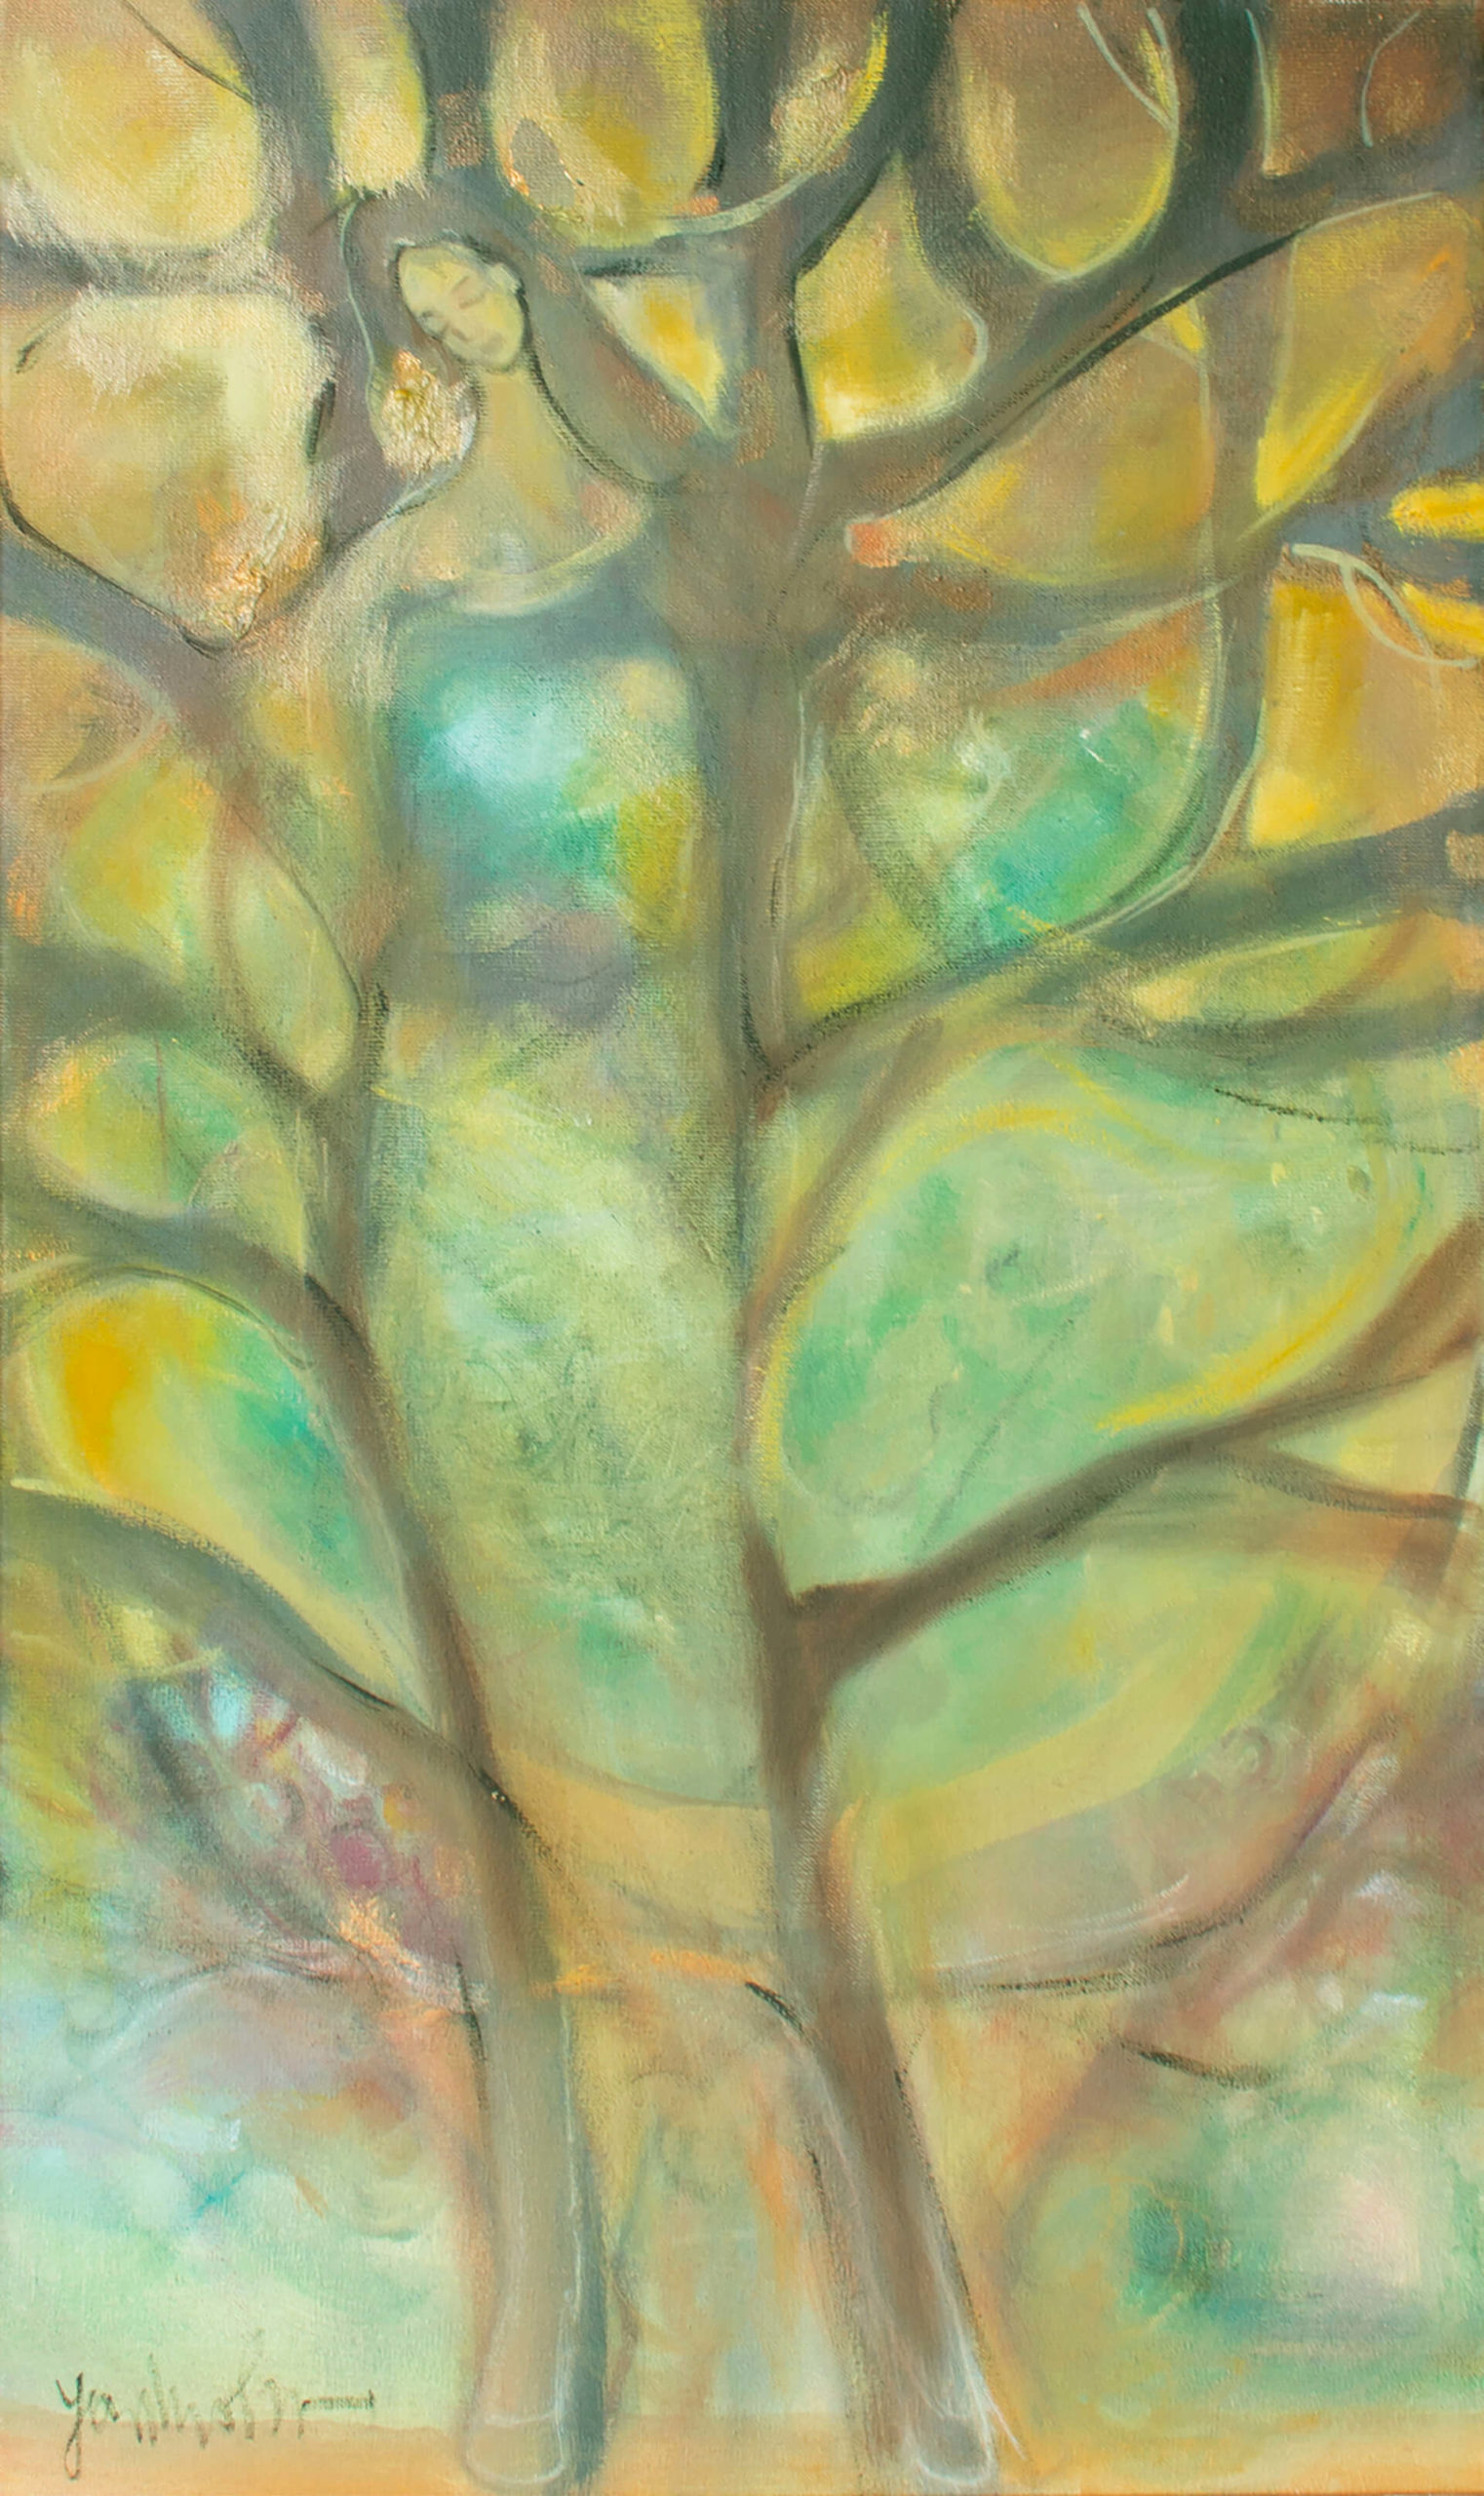 Tree woman. 30x60 cm. Oil on canvas. Sold